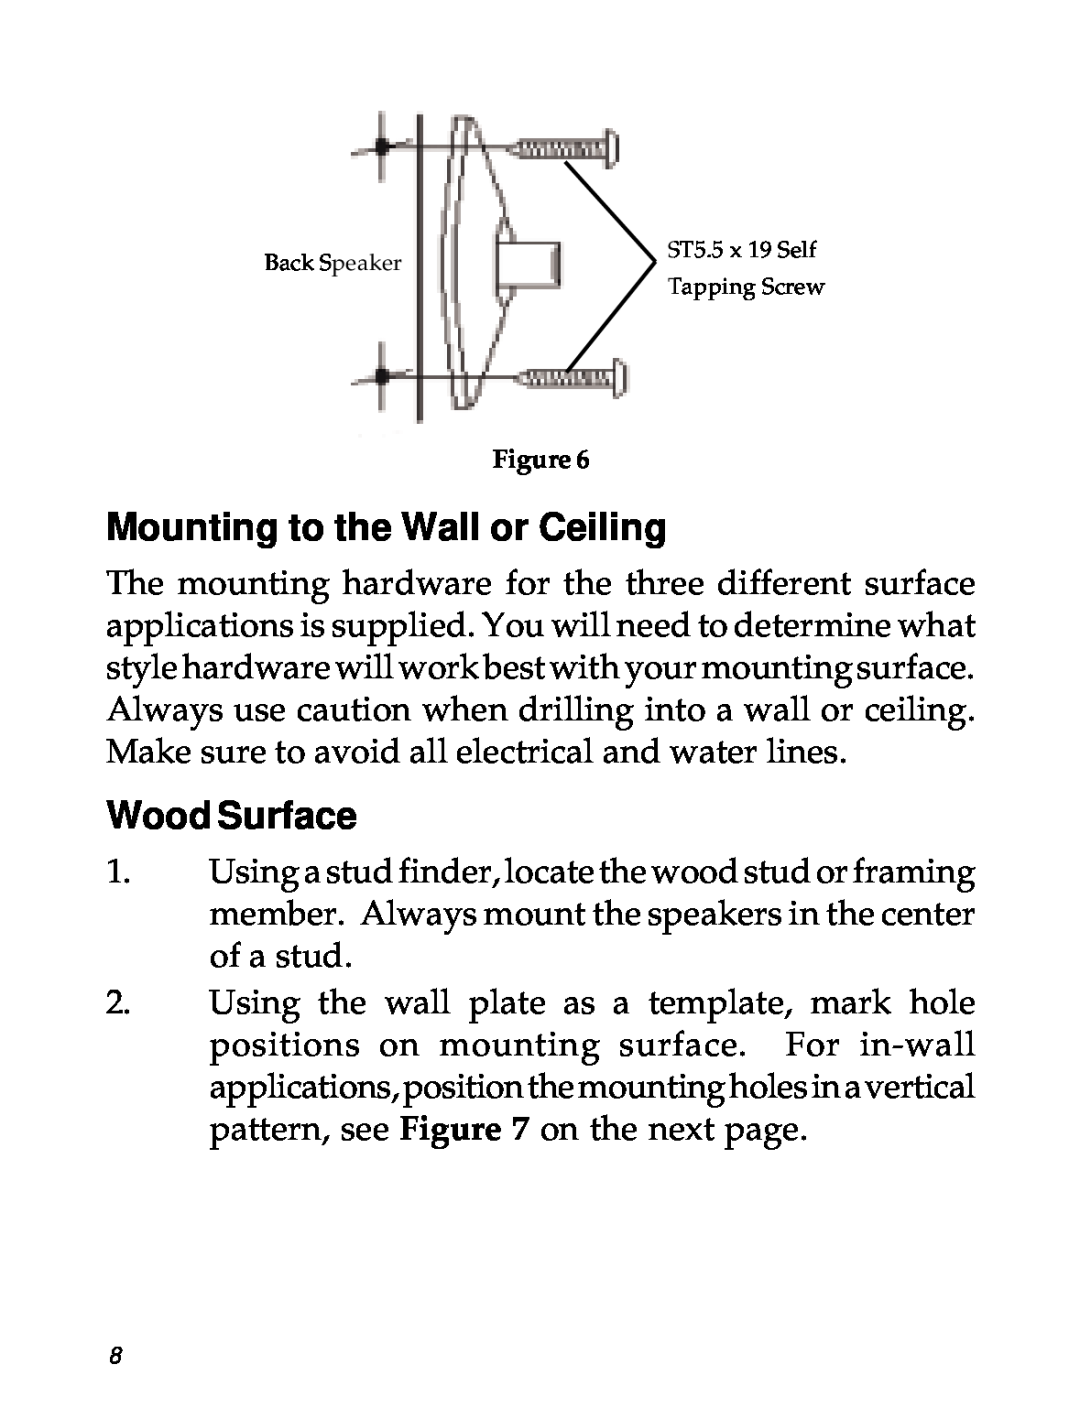 SIIG 04-0600A manual Mounting to the Wall or Ceiling, Wood Surface, Back Speaker, ST5.5 x 19 Self Tapping Screw 